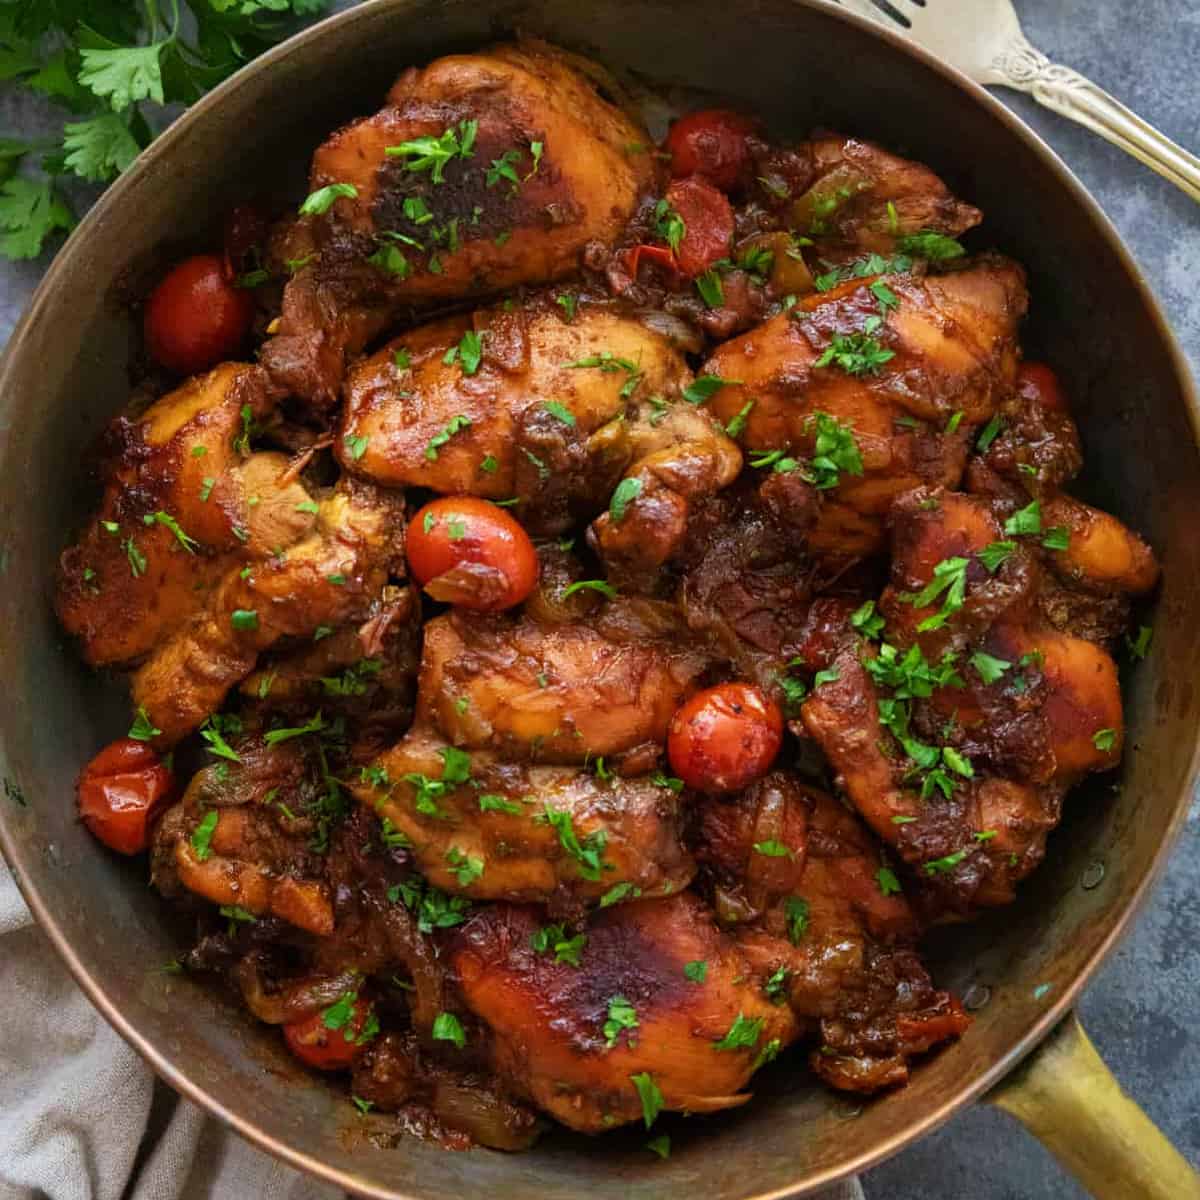 An easy balsamic chicken recipe that's perfect for a quick weeknight dinner. The balsamic marinade doubles as the sauce and makes the chicken extra juicy and delicious.
